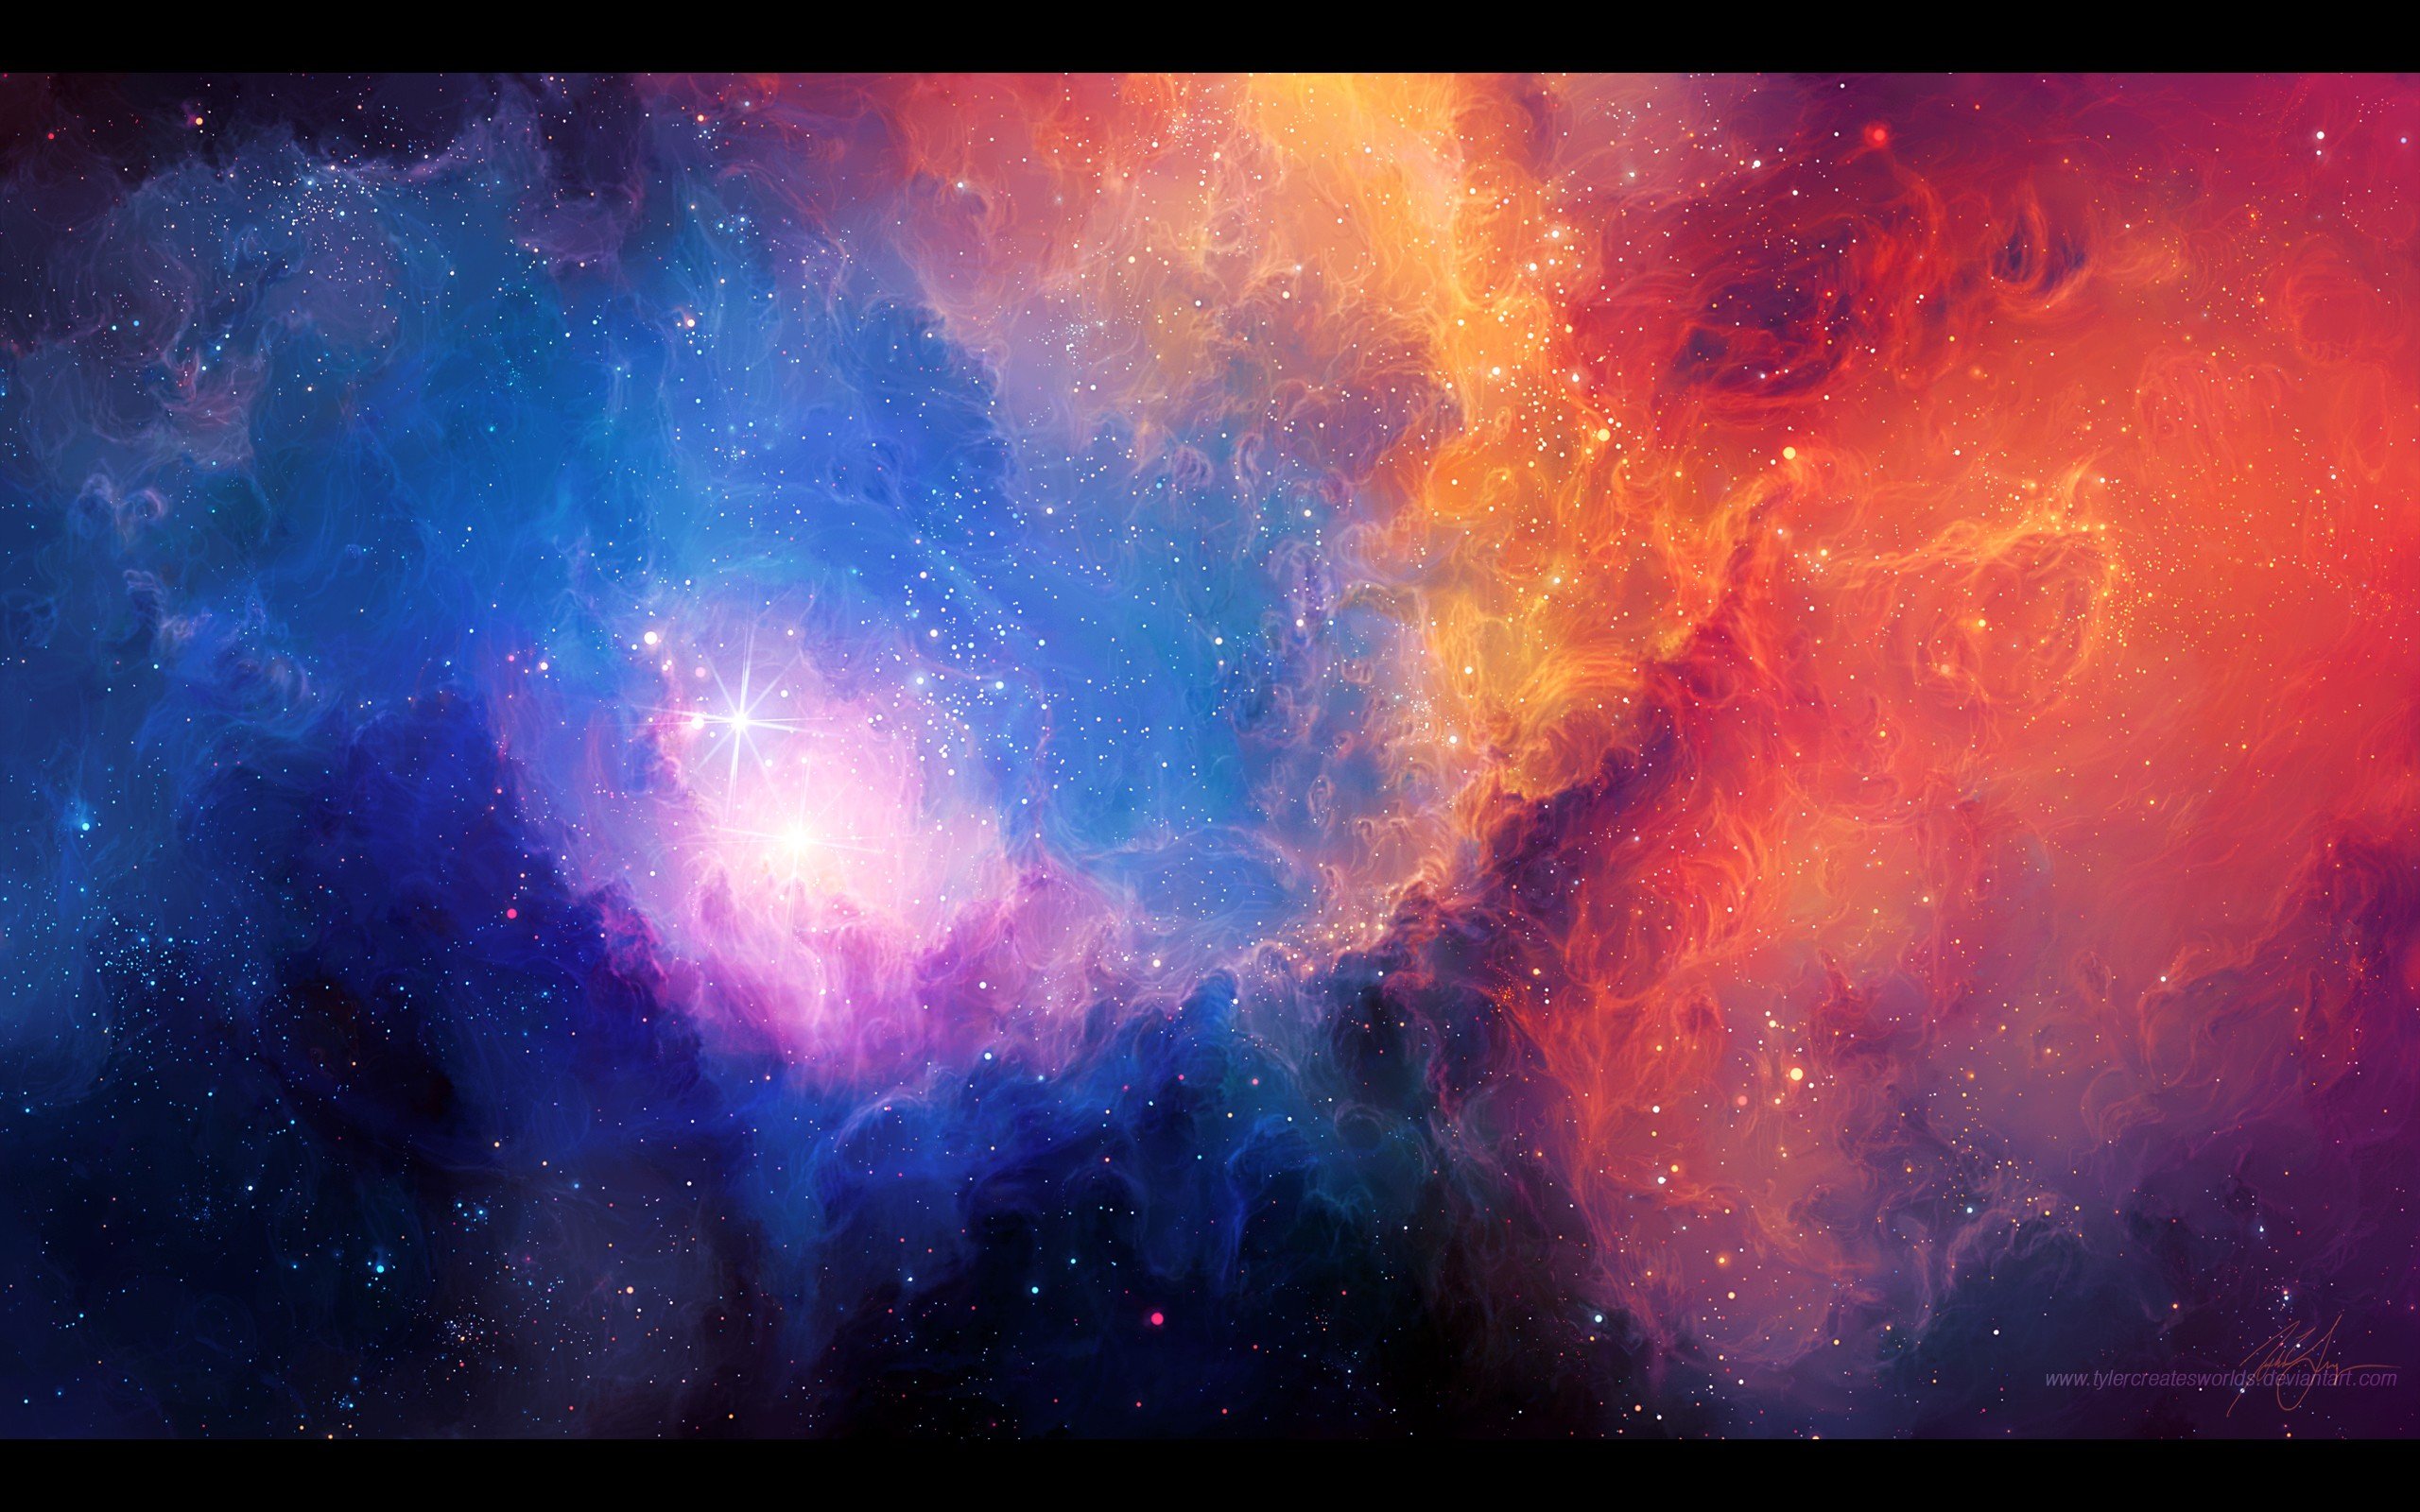  outer space stars nebulae artwork Tyler Young wallpaper background